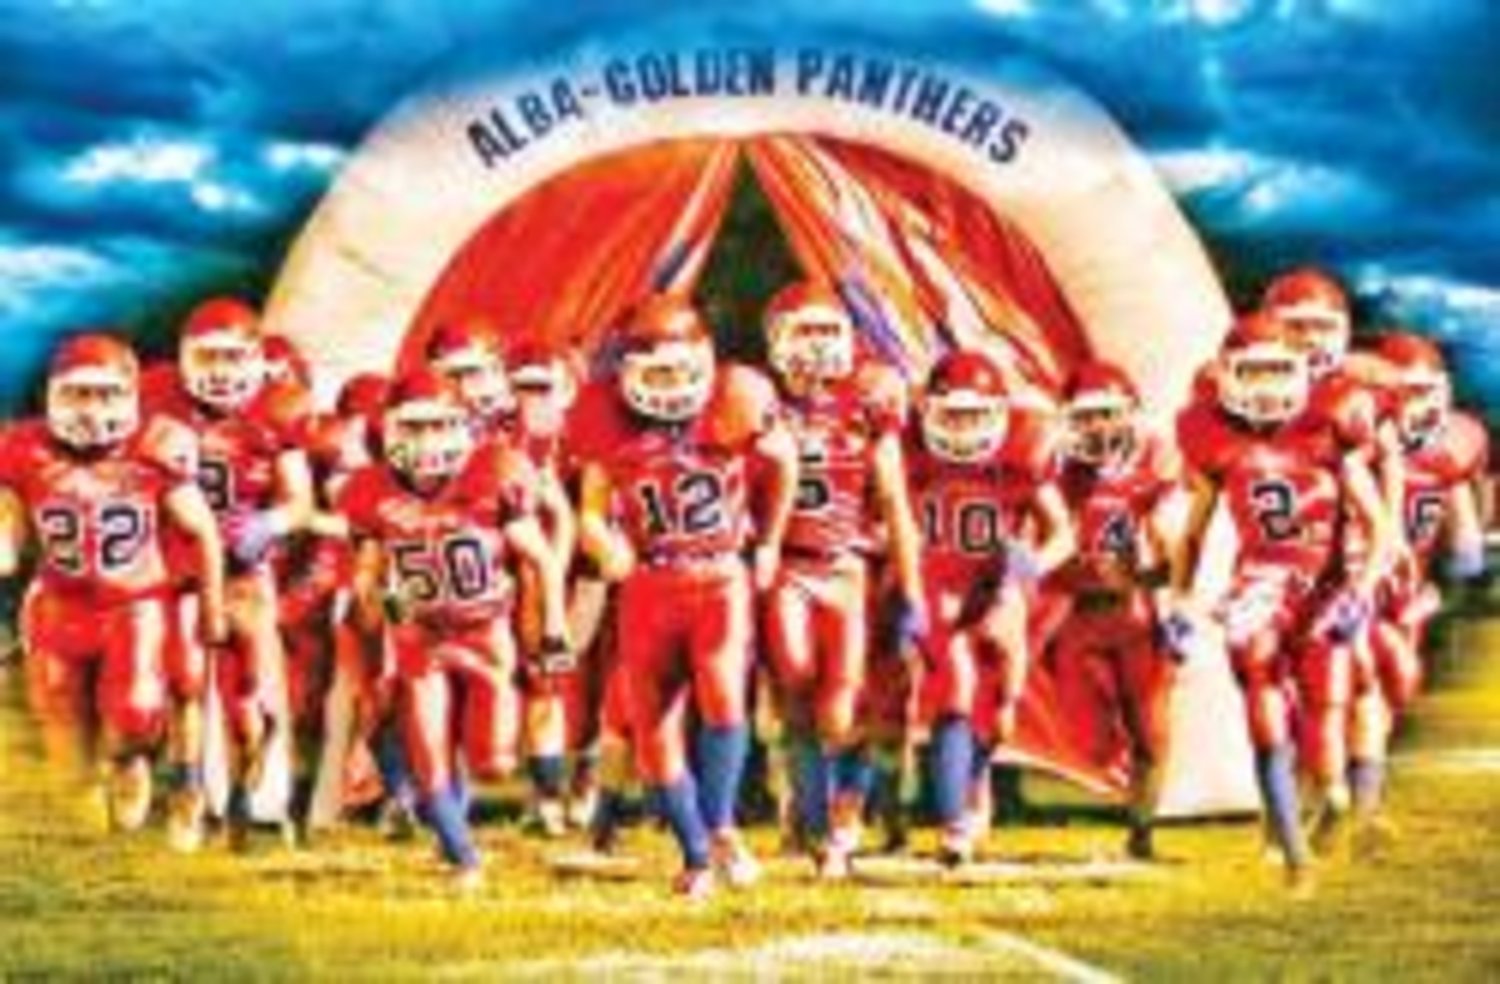 The Alba-Golden Panthers take a perfect 4-0 this year headed into Friday's homecoming game against Big Sandy.